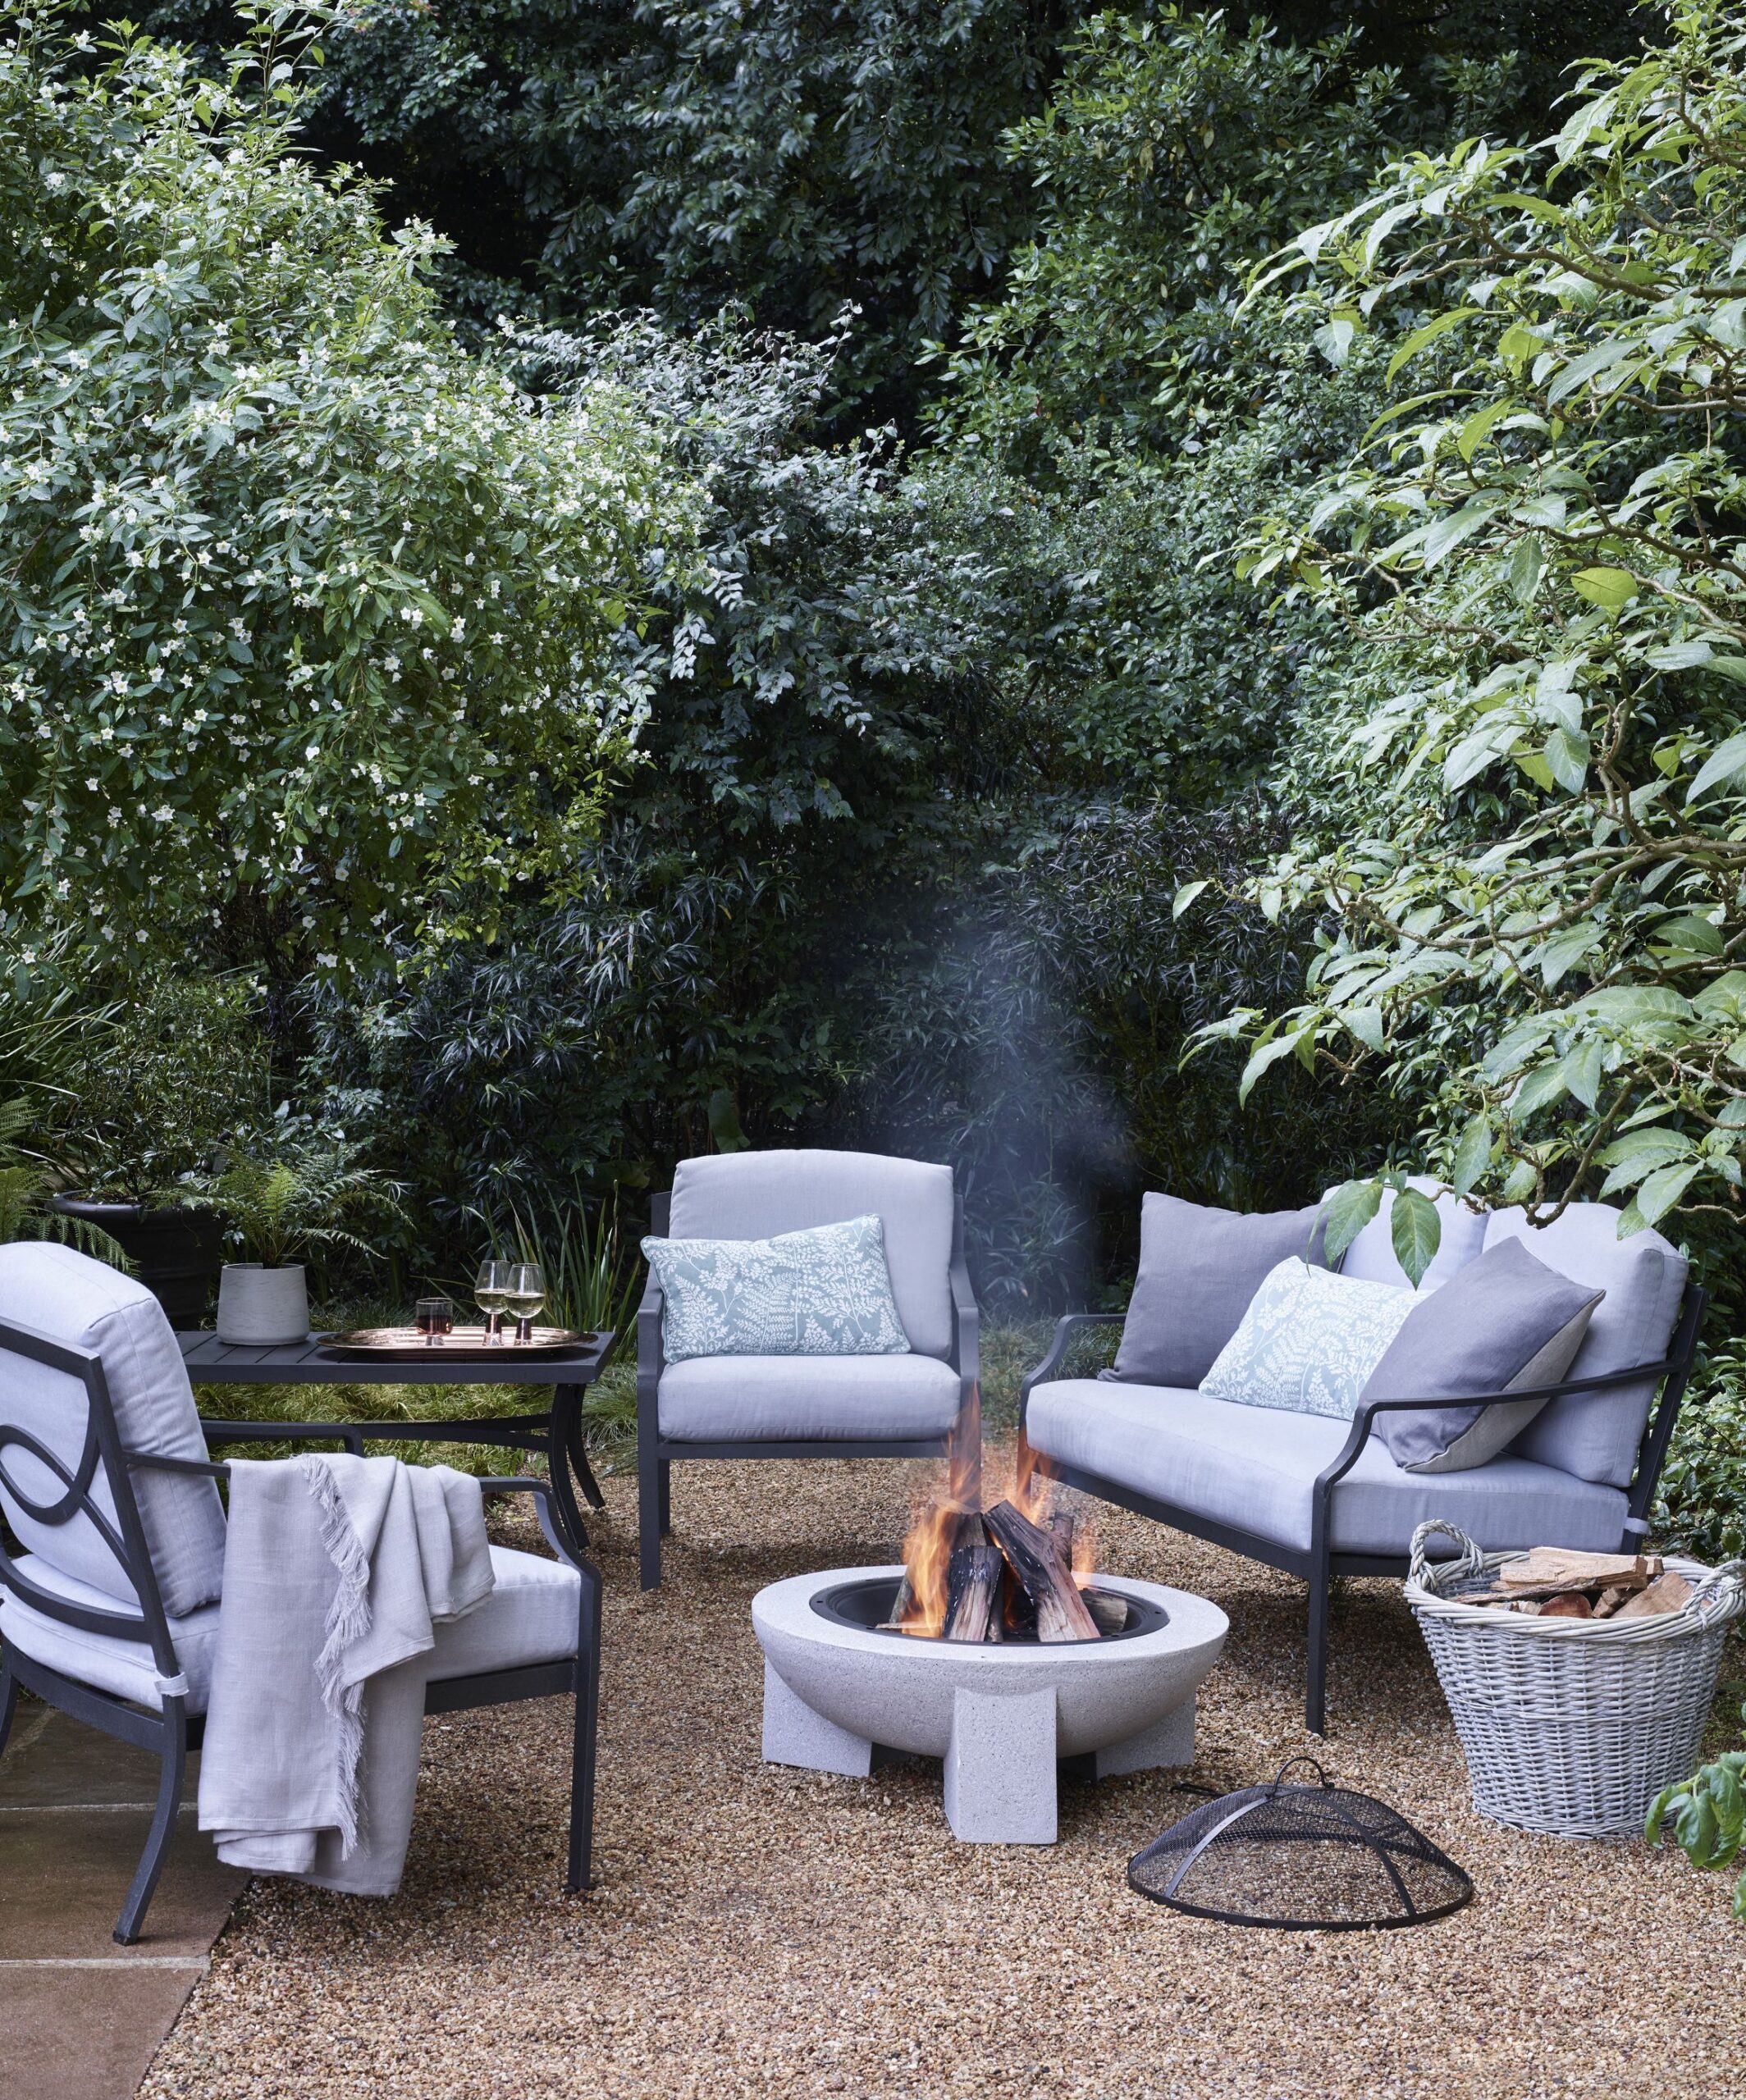 Timeless Elegance: Wrought Iron Garden Furniture for Your Outdoor Oasis